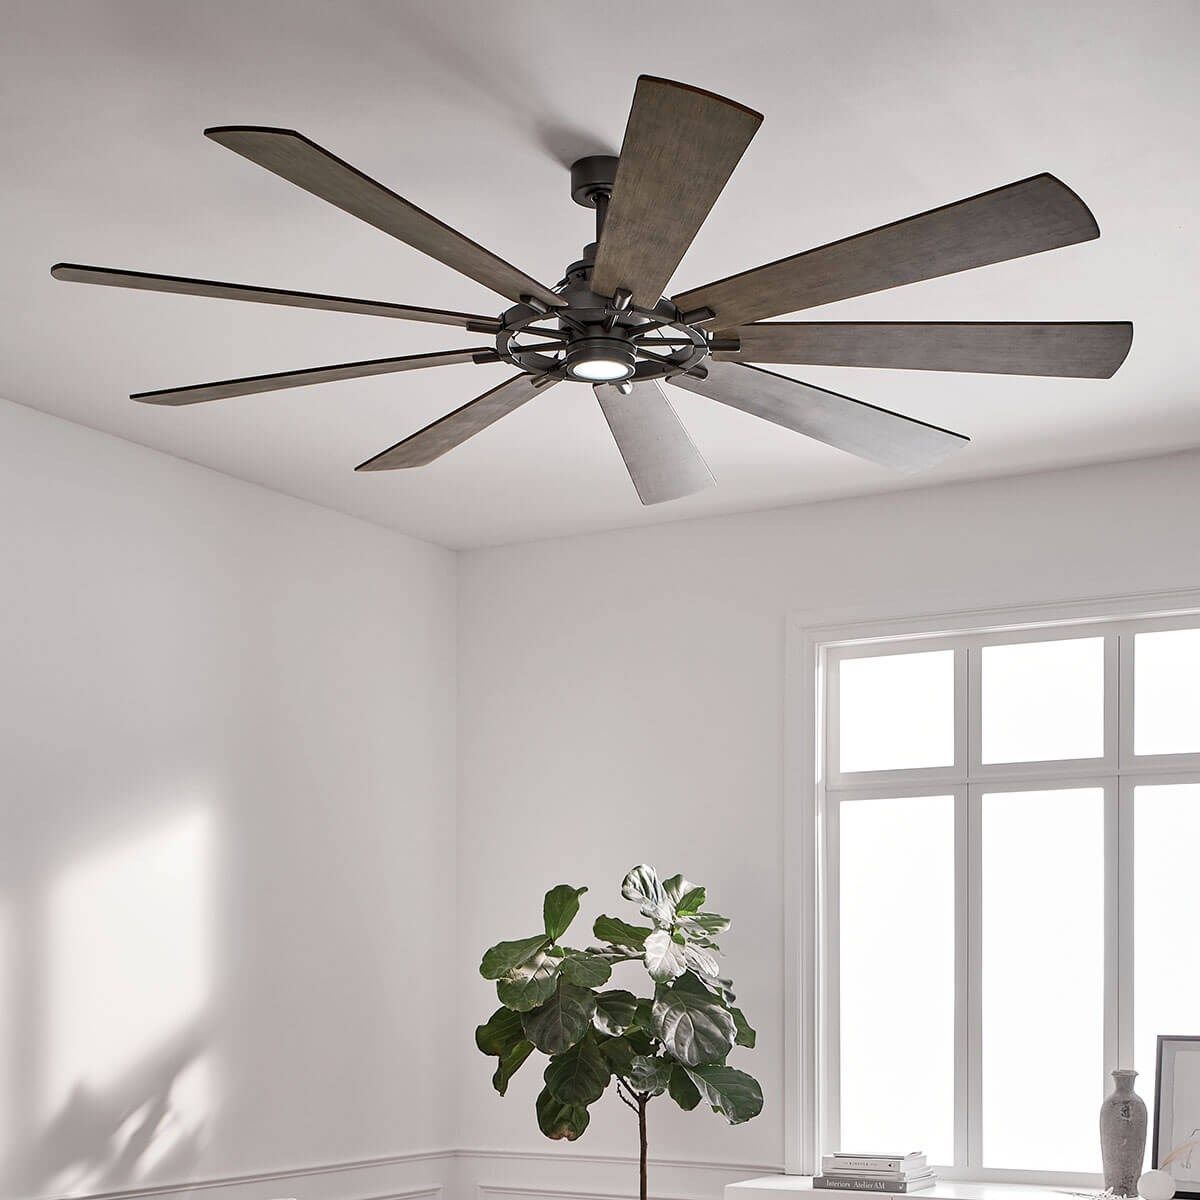 Gentry 85 Inch Farmhouse Windmill Outdoor Ceiling Fan With Light, Wall Control Included